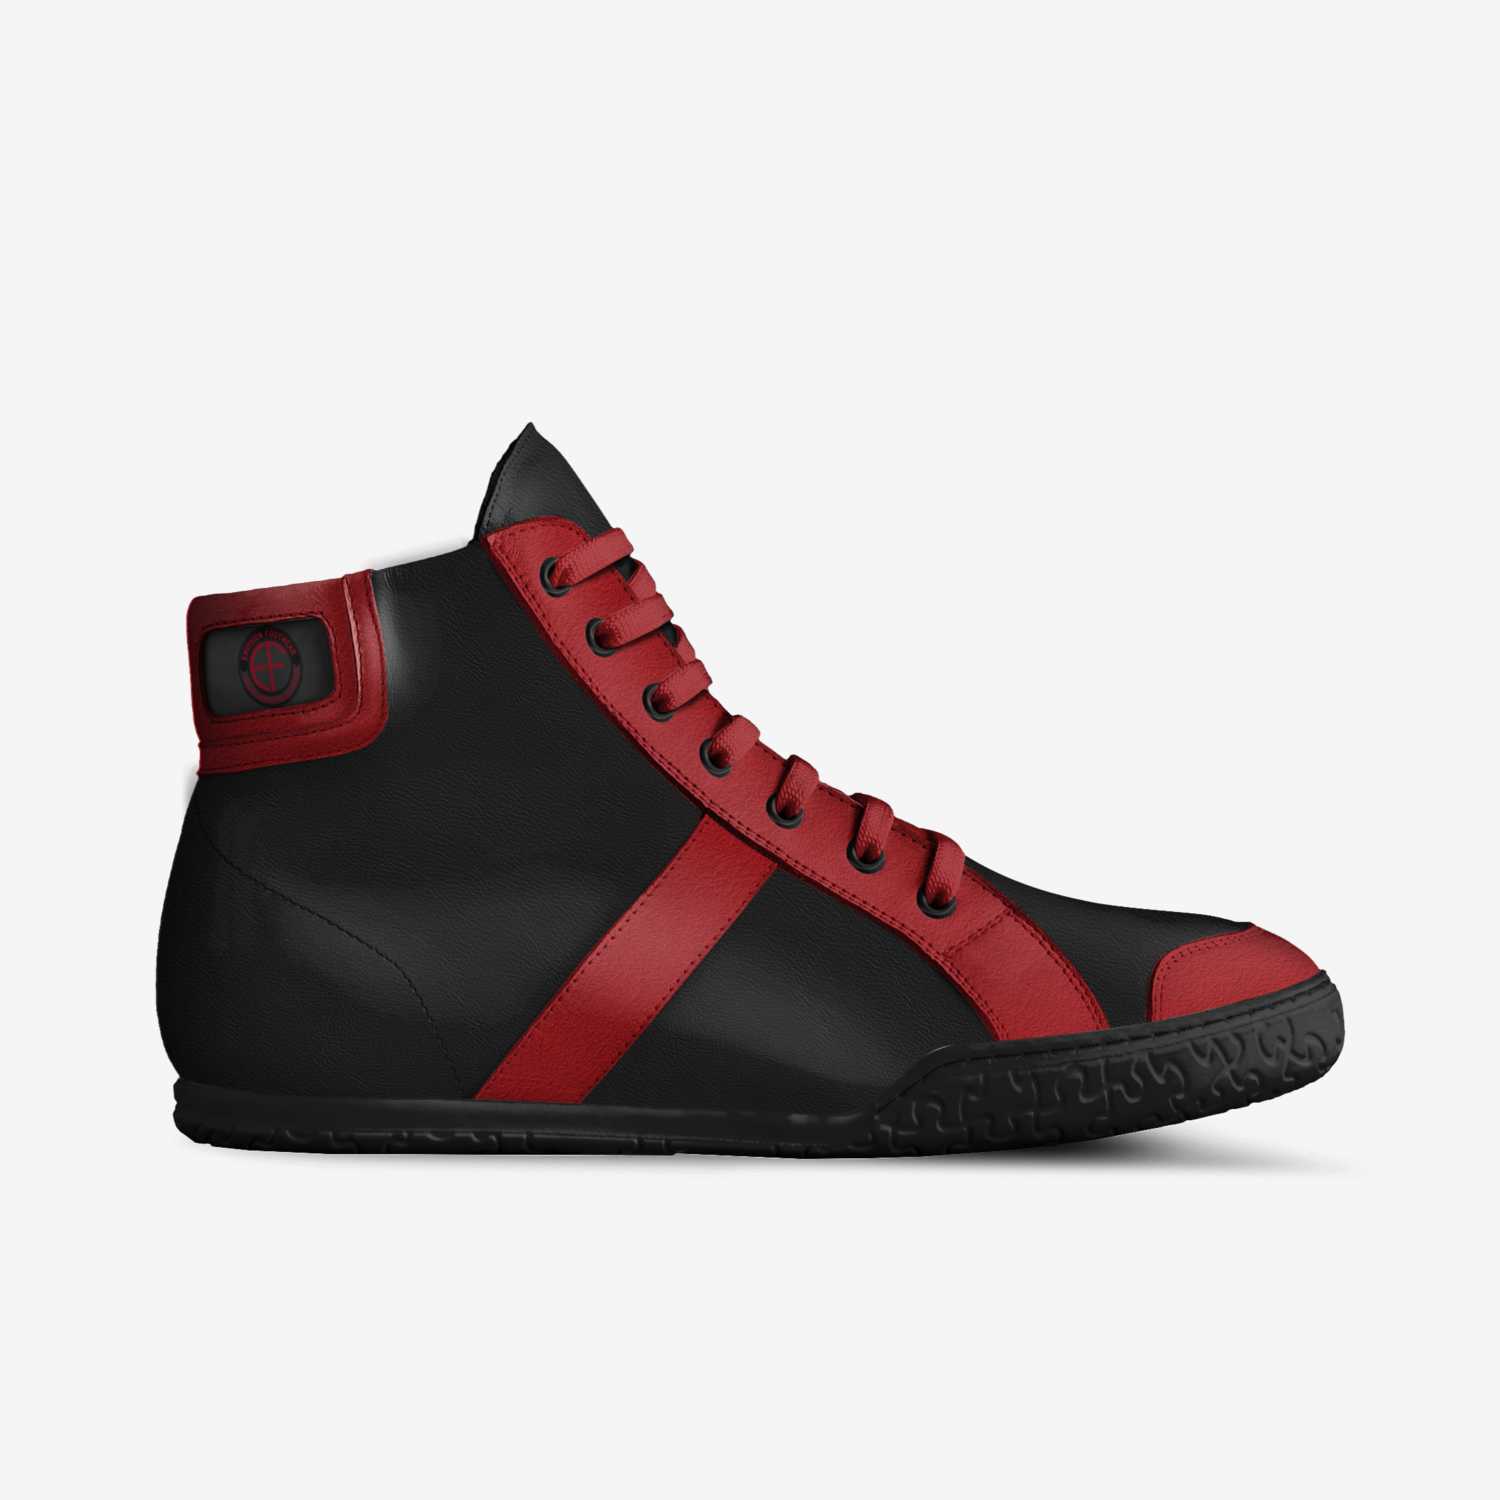 Envision Footwear | A Custom Shoe concept by Ureal Irving Iii